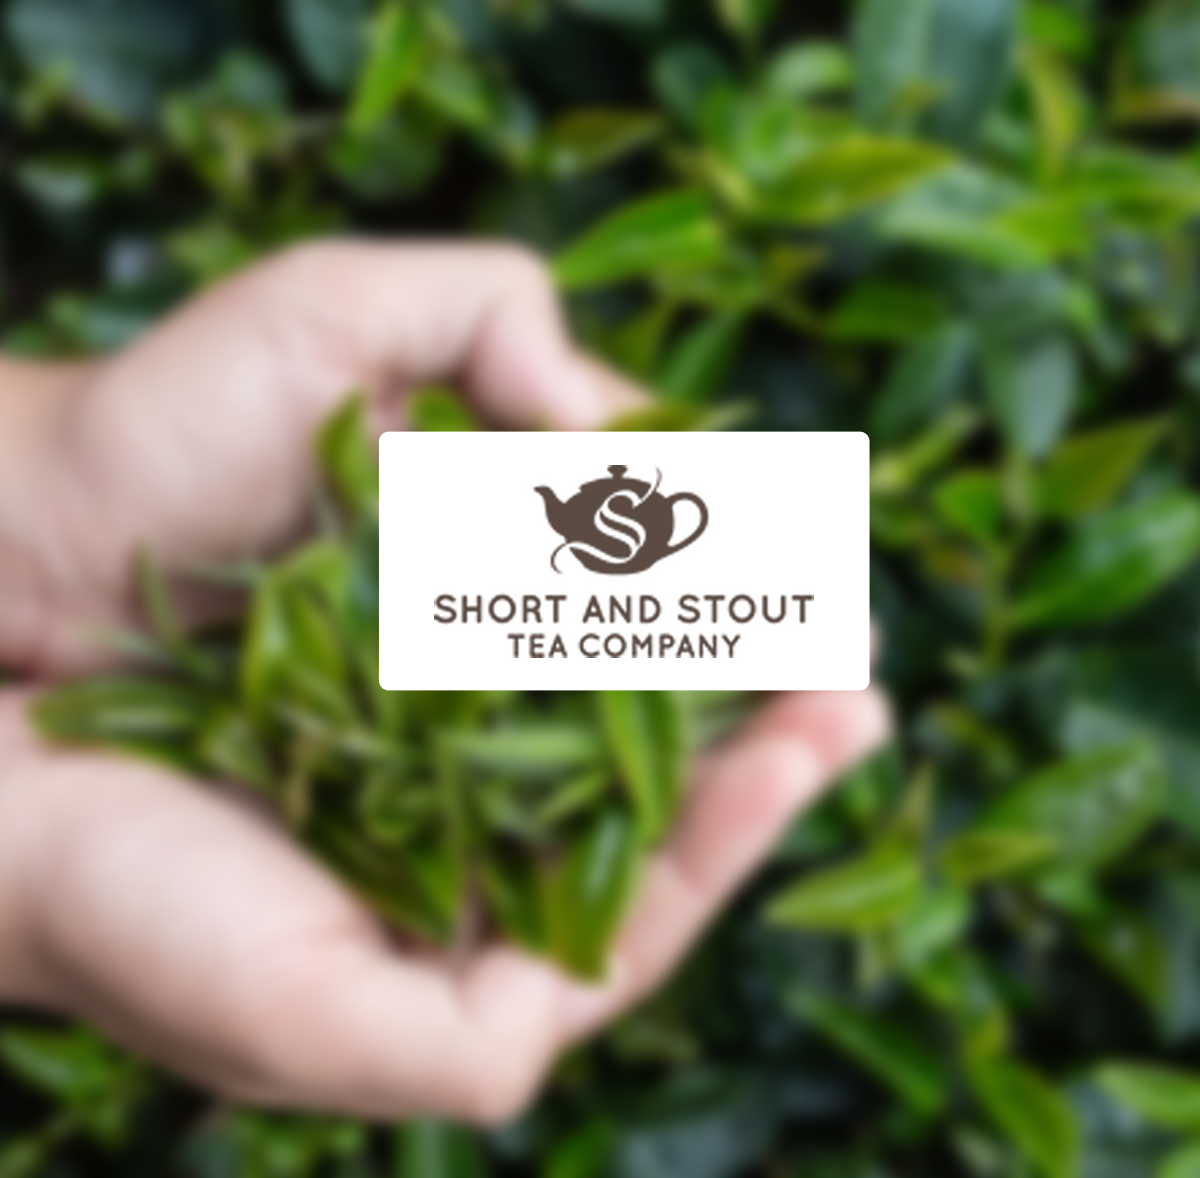 What’s Brewing at Short and Stout in November